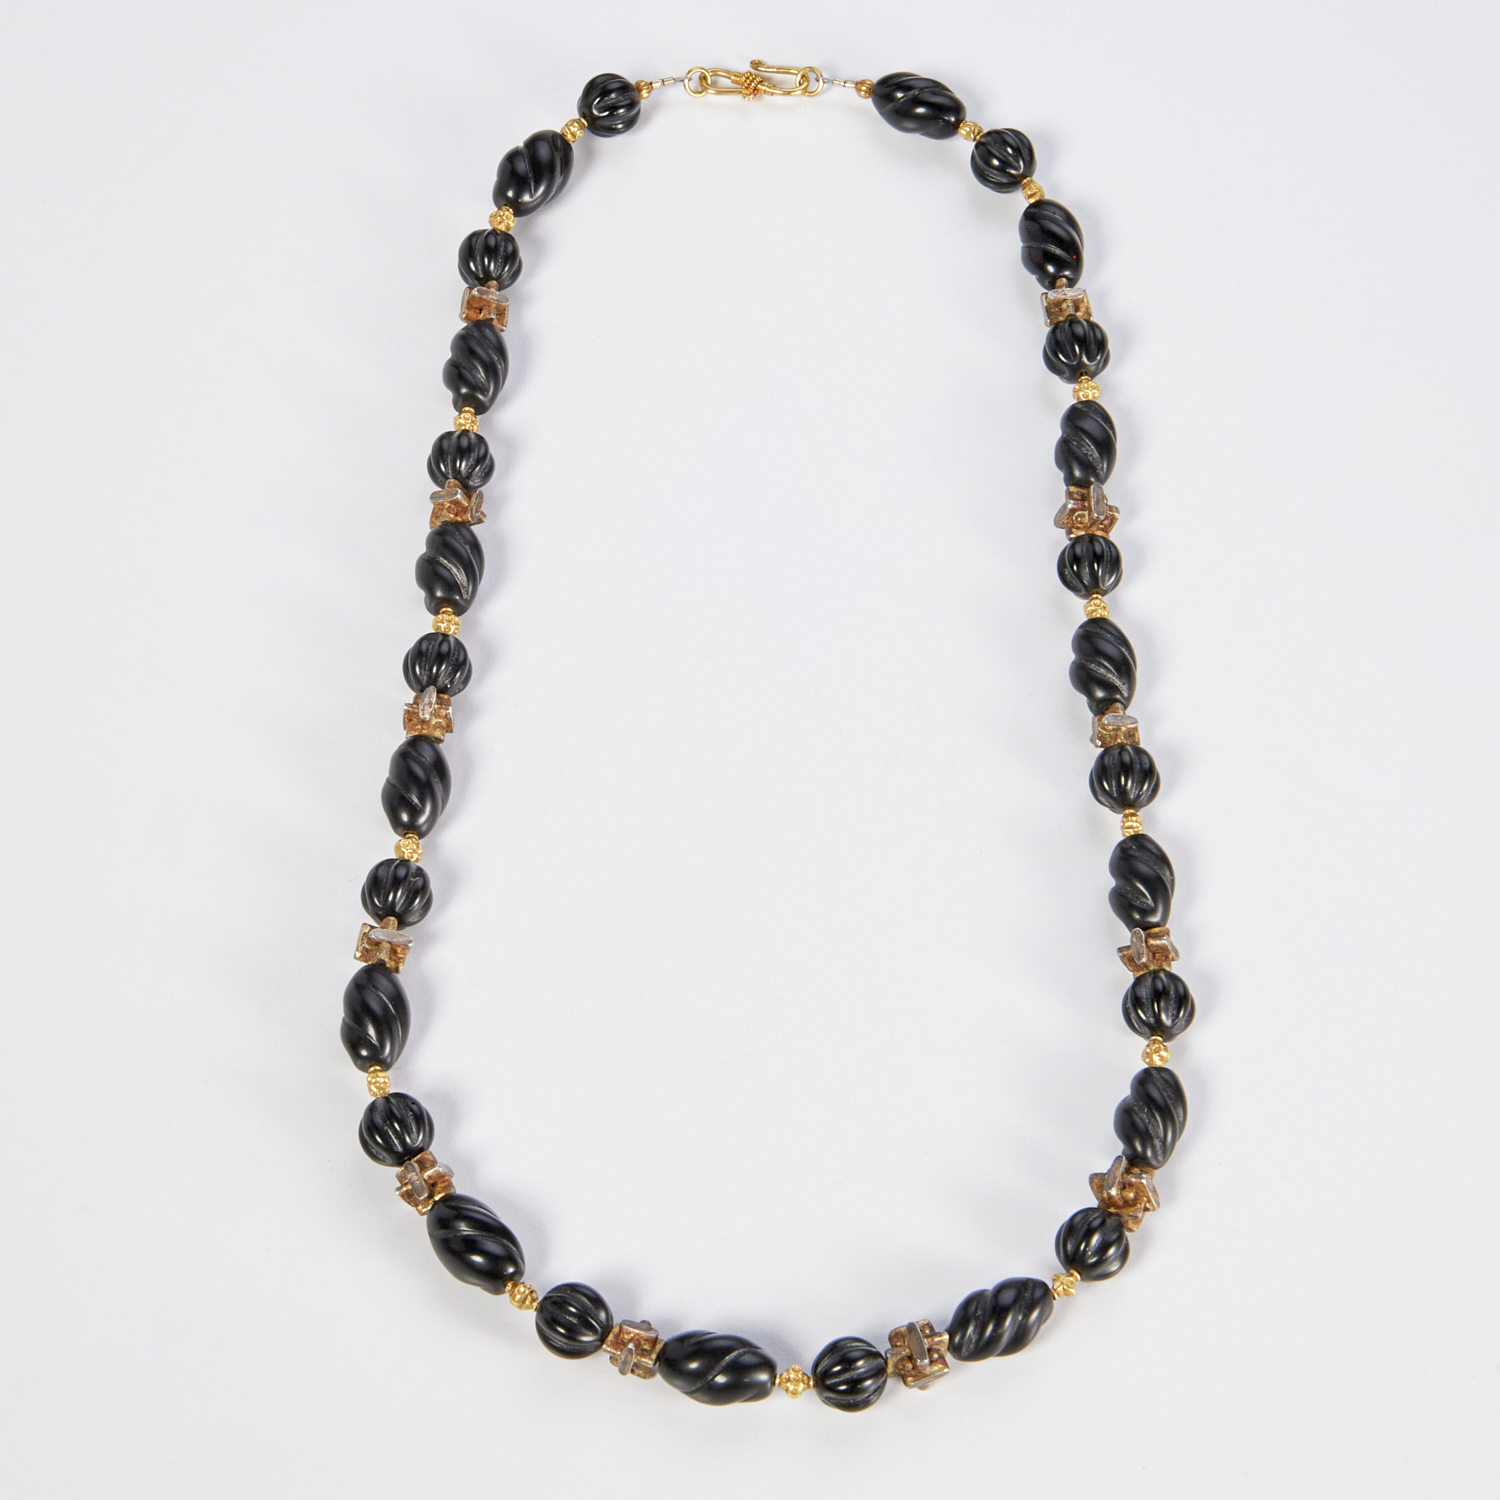 ONYX, GOLD, AND SILVER BEADED NECKLACE